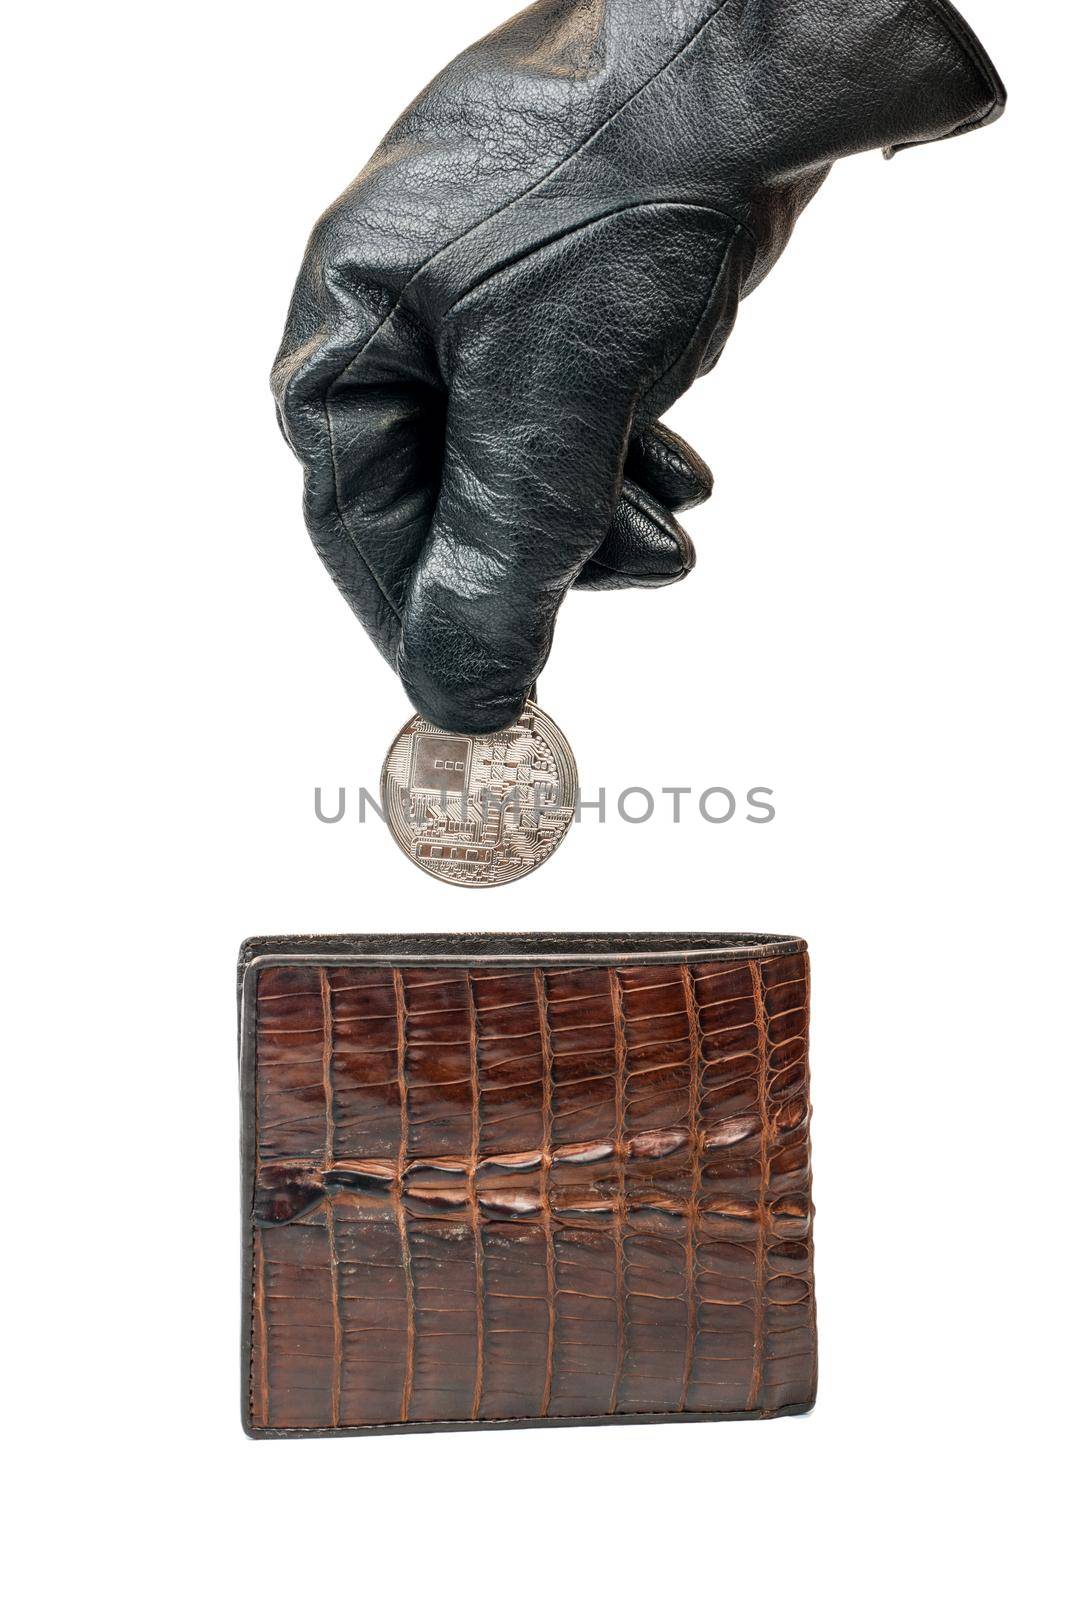 Thief in gloves pulls out a silver coin bitcoin of their wallet on white background